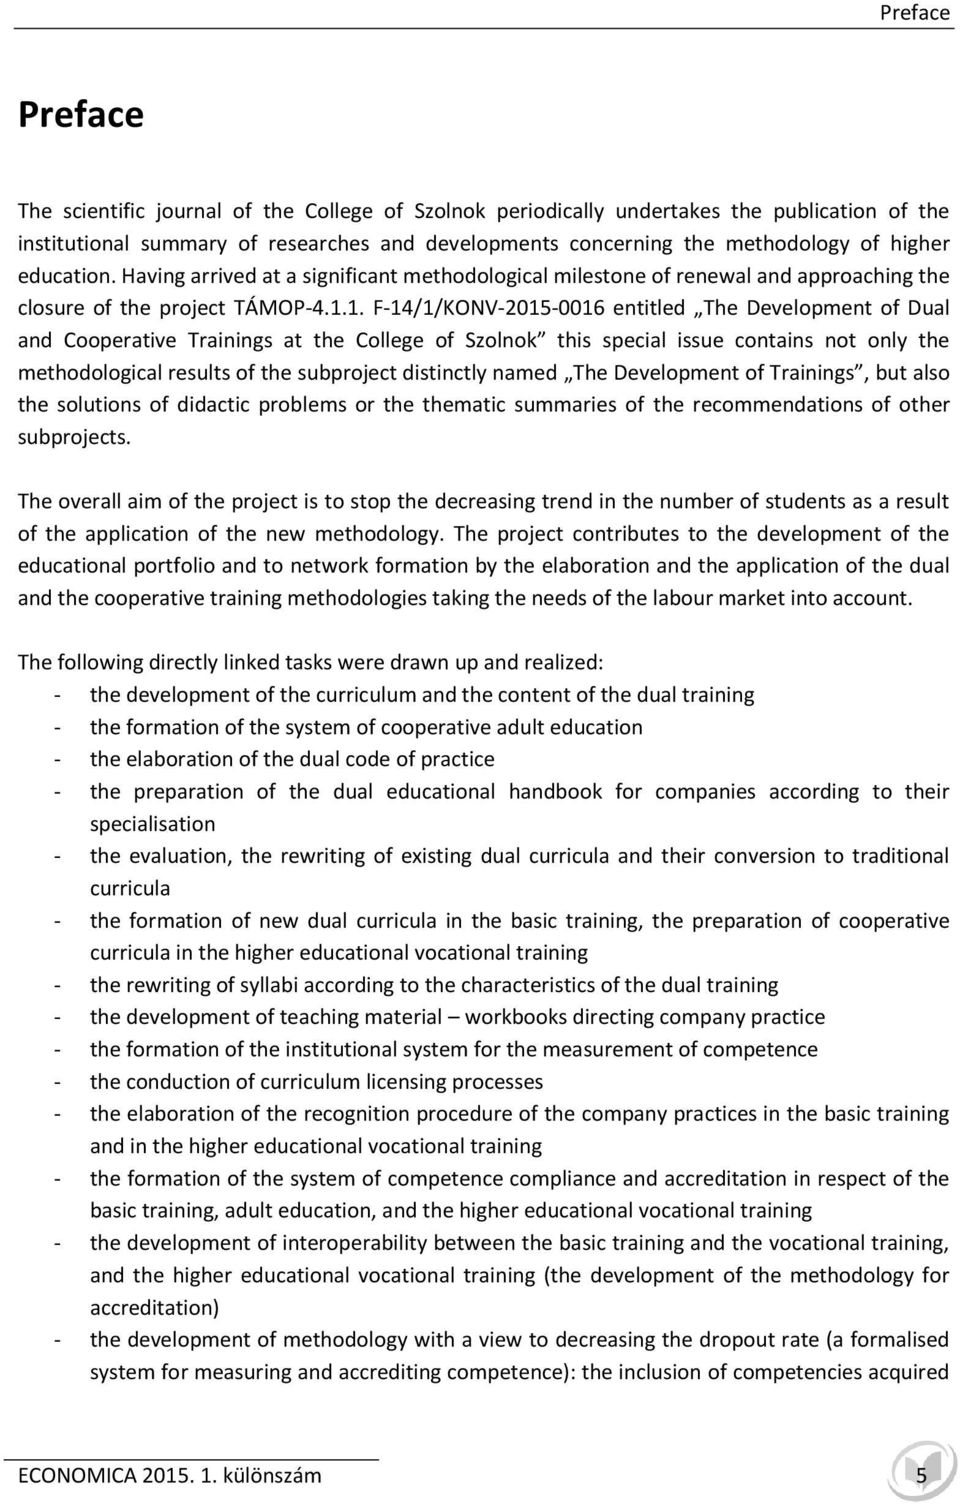 1. F-14/1/KONV-2015-0016 entitled The Development of Dual and Cooperative Trainings at the College of Szolnok this special issue contains not only the methodological results of the subproject